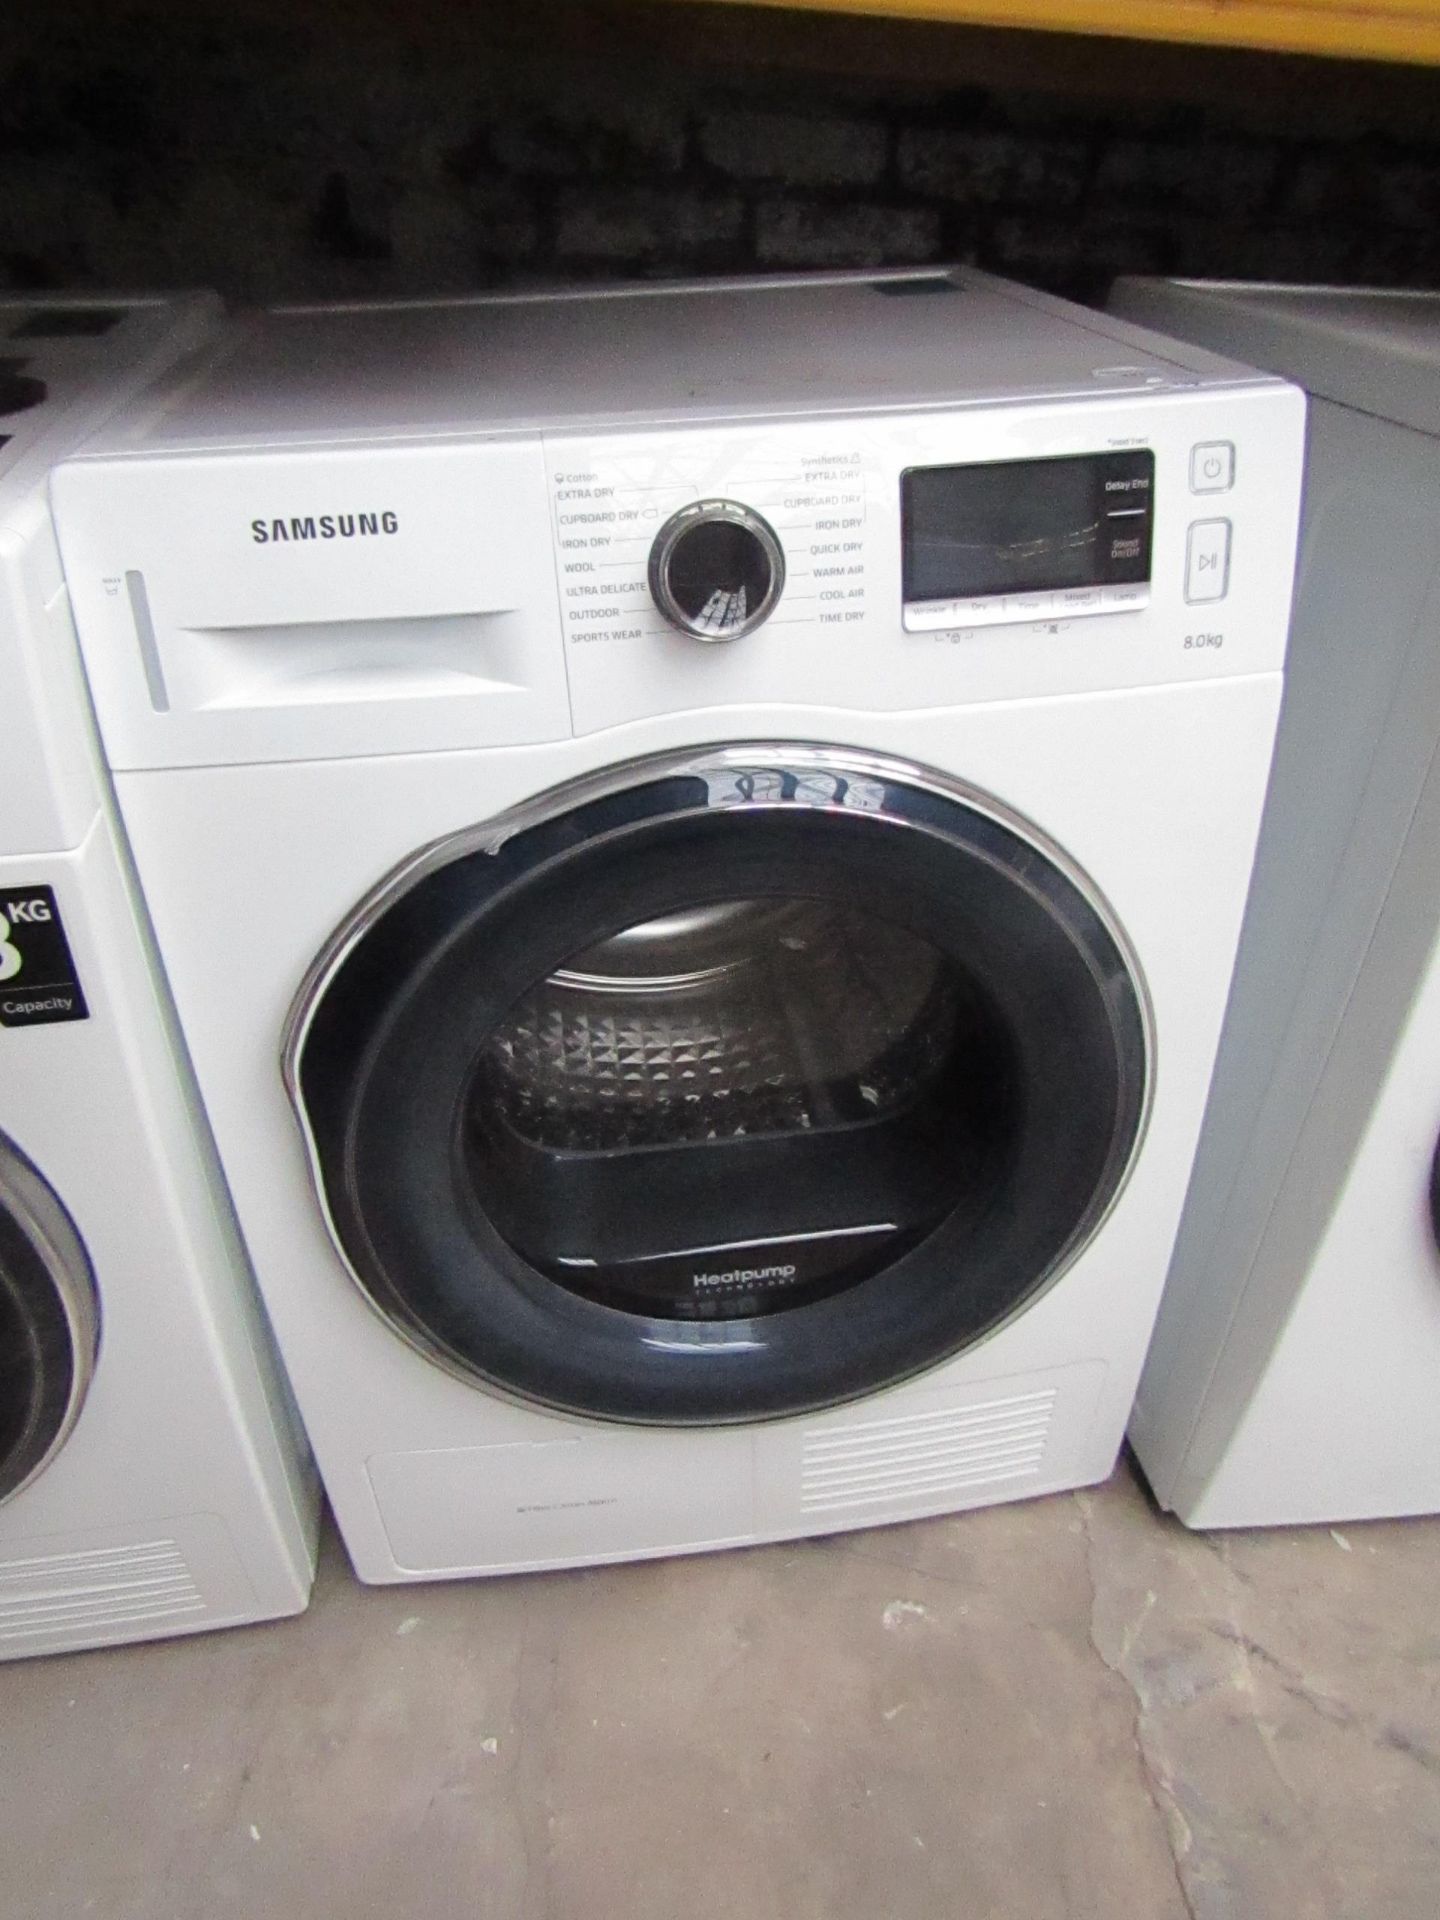 Samsung A++ 8Kg condenser dryer, powers on but unable to test any further due to error code "HC"